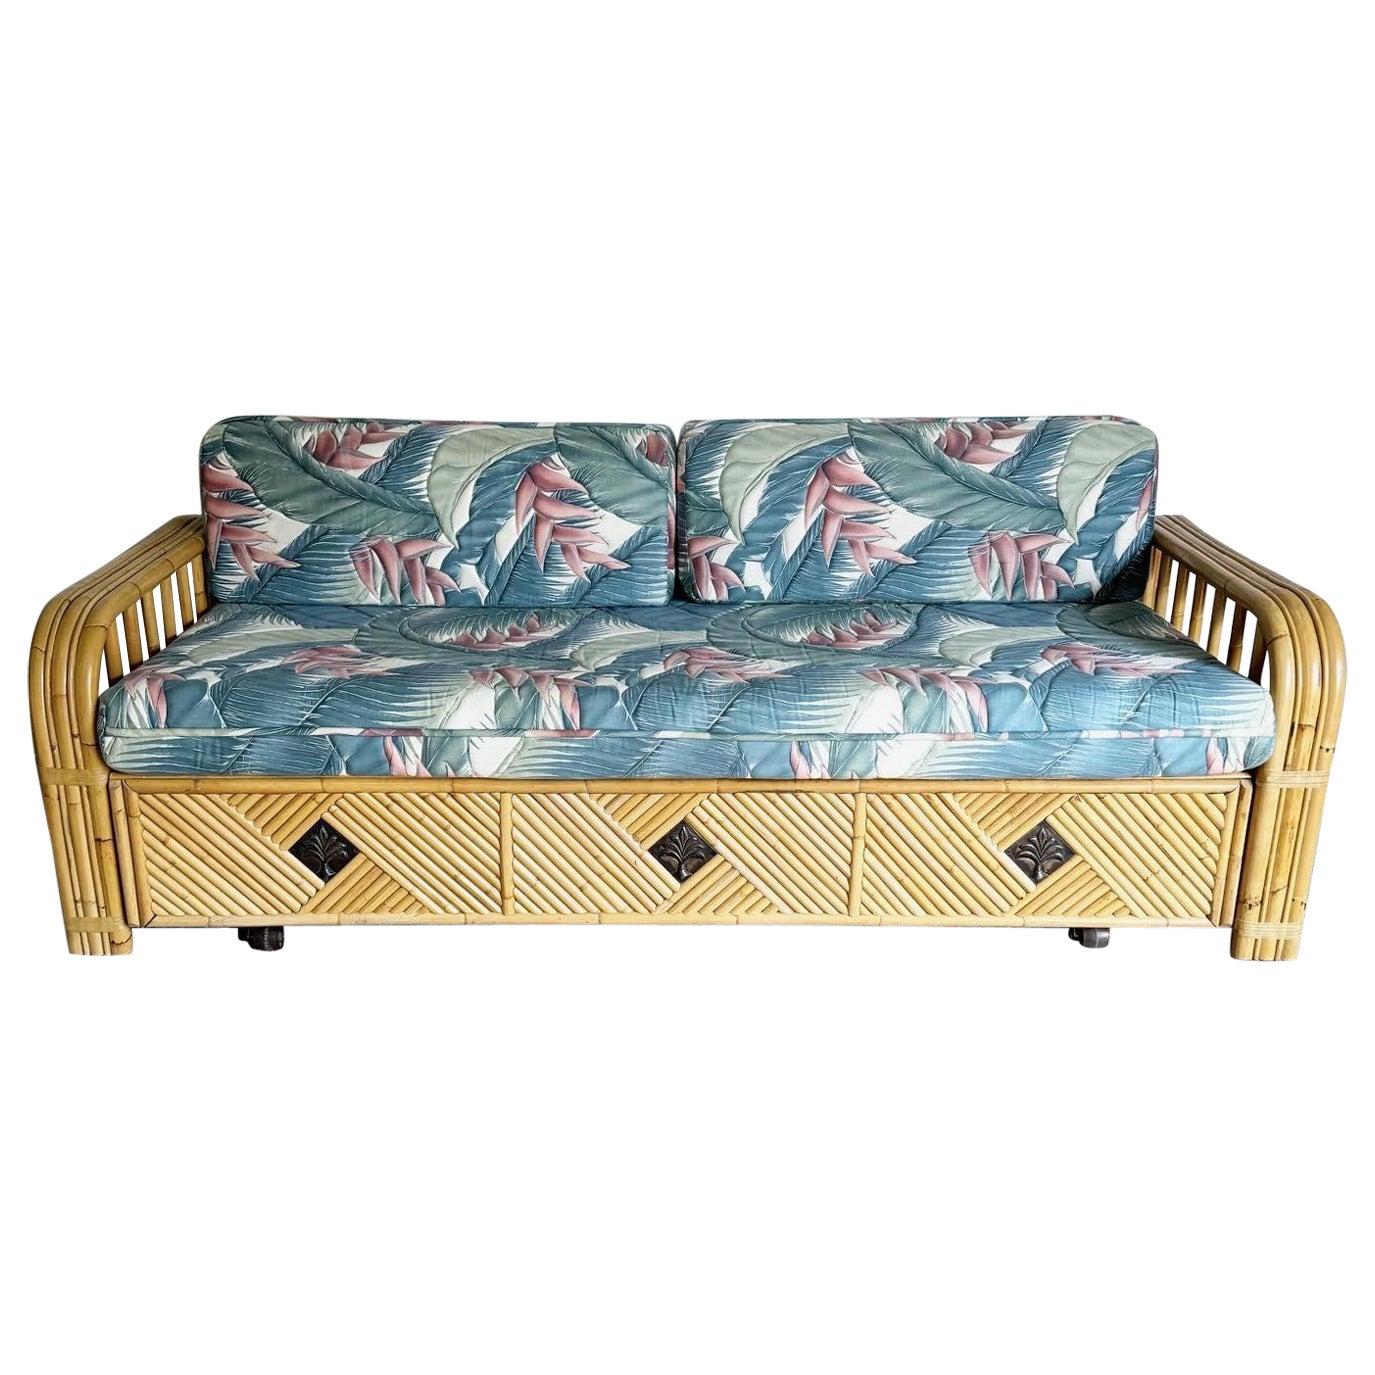 Boho Chic Bamboo Rattan Day Bed With Pull Out Trundle